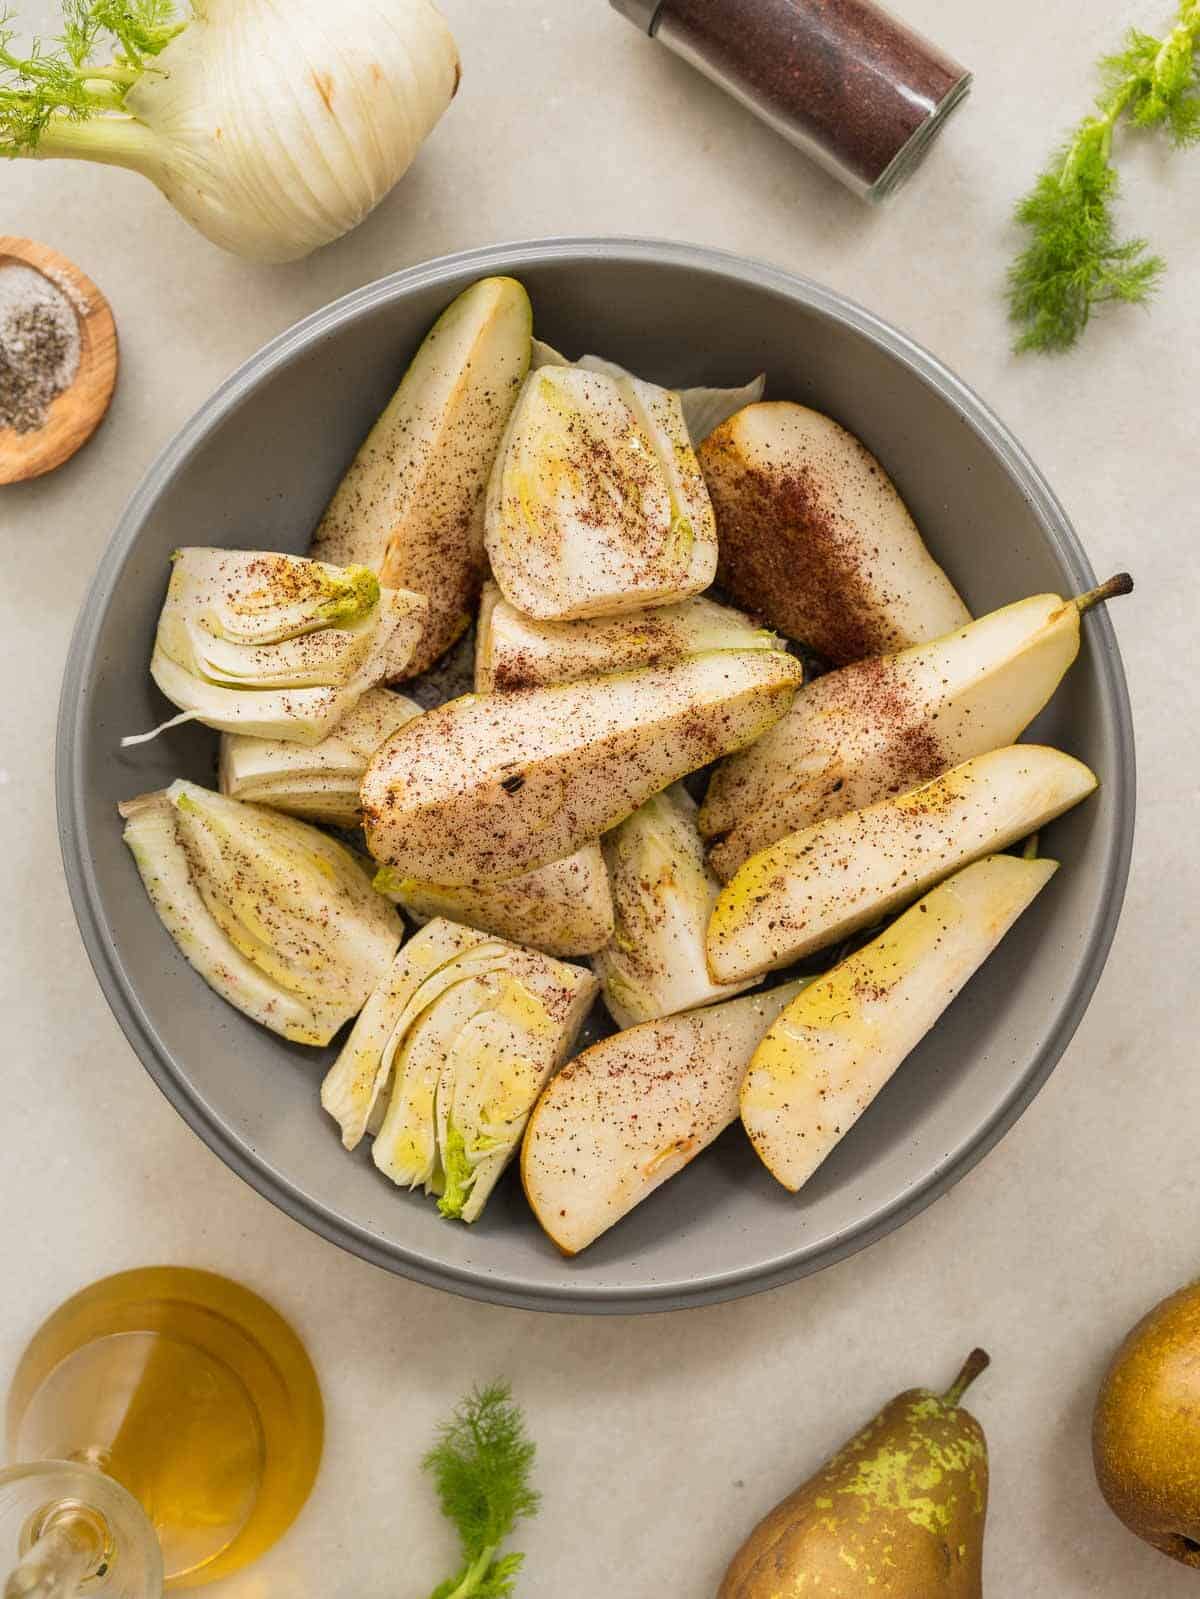 fennel and pear slices in bowl seasoned with sumac and olive oil.